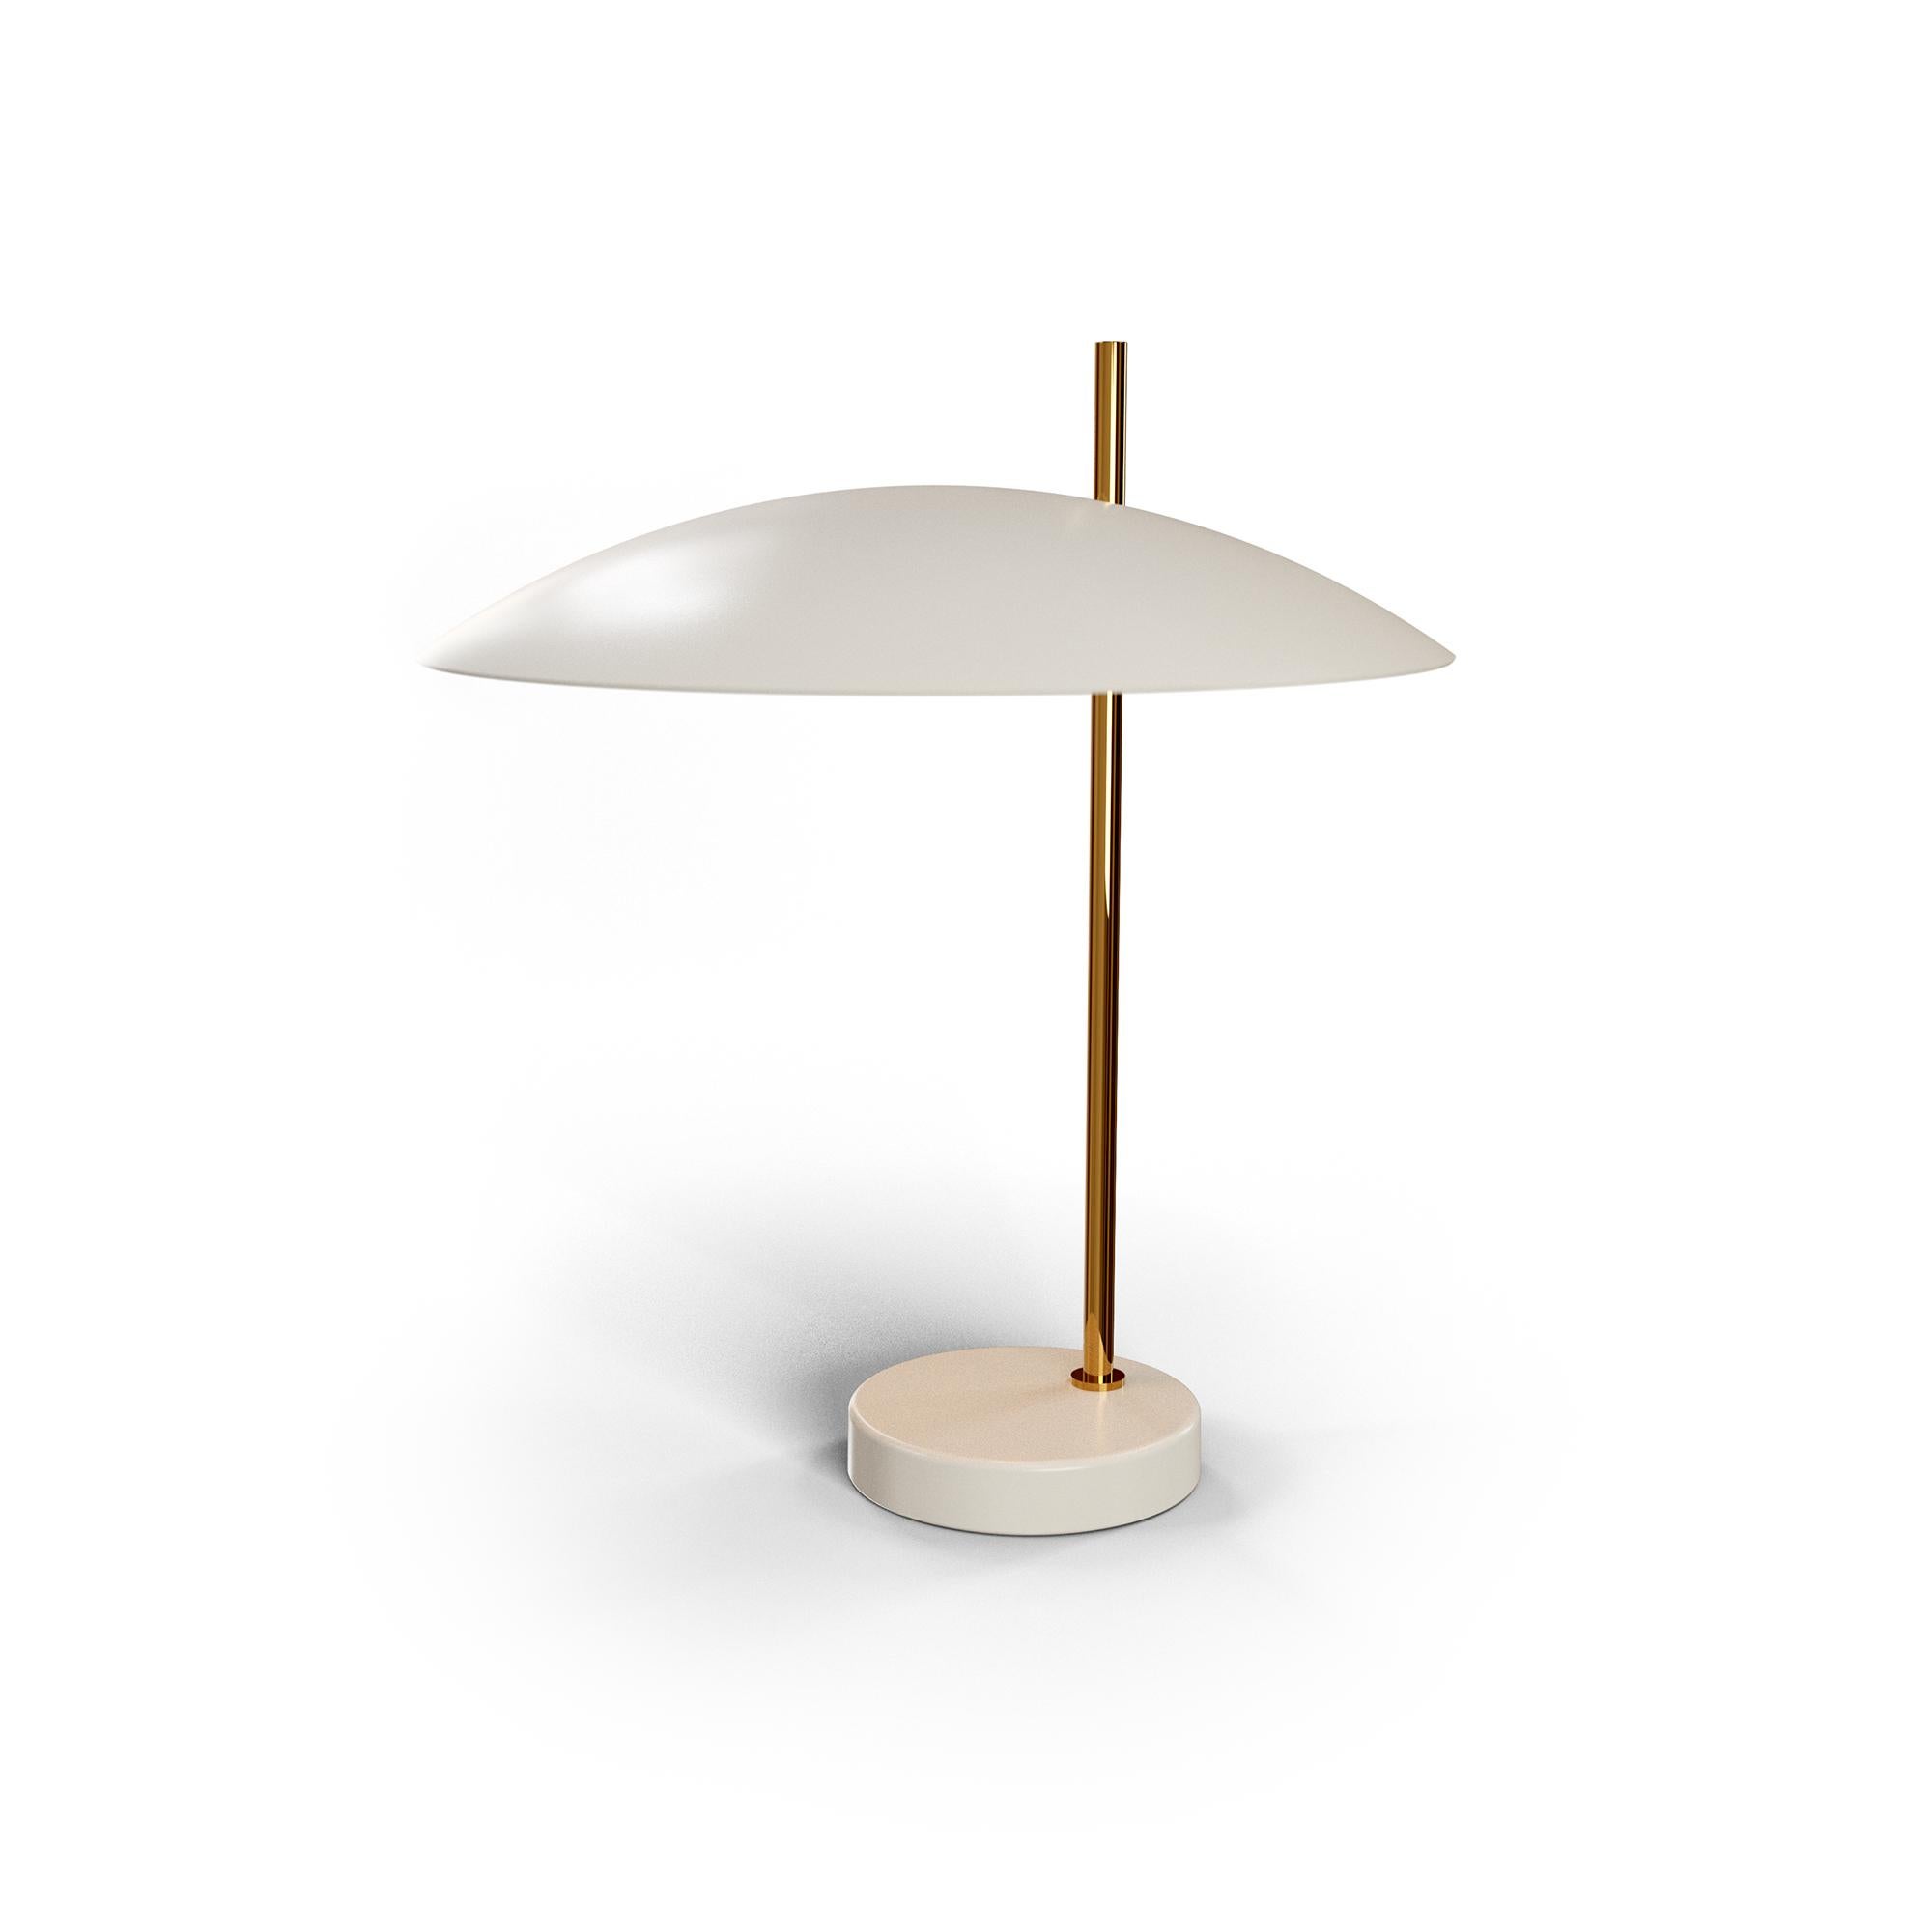 Golden Brass 1013 Table Lamp by Disderot
Limited Edition. 
Designed by Pierre Disderot.
Dimensions: Ø 34,1 x H 39,77 cm.
Materials: Golden brass and white metal.

Delivered with authentication certificate. Made in France. Available in brushed brass,